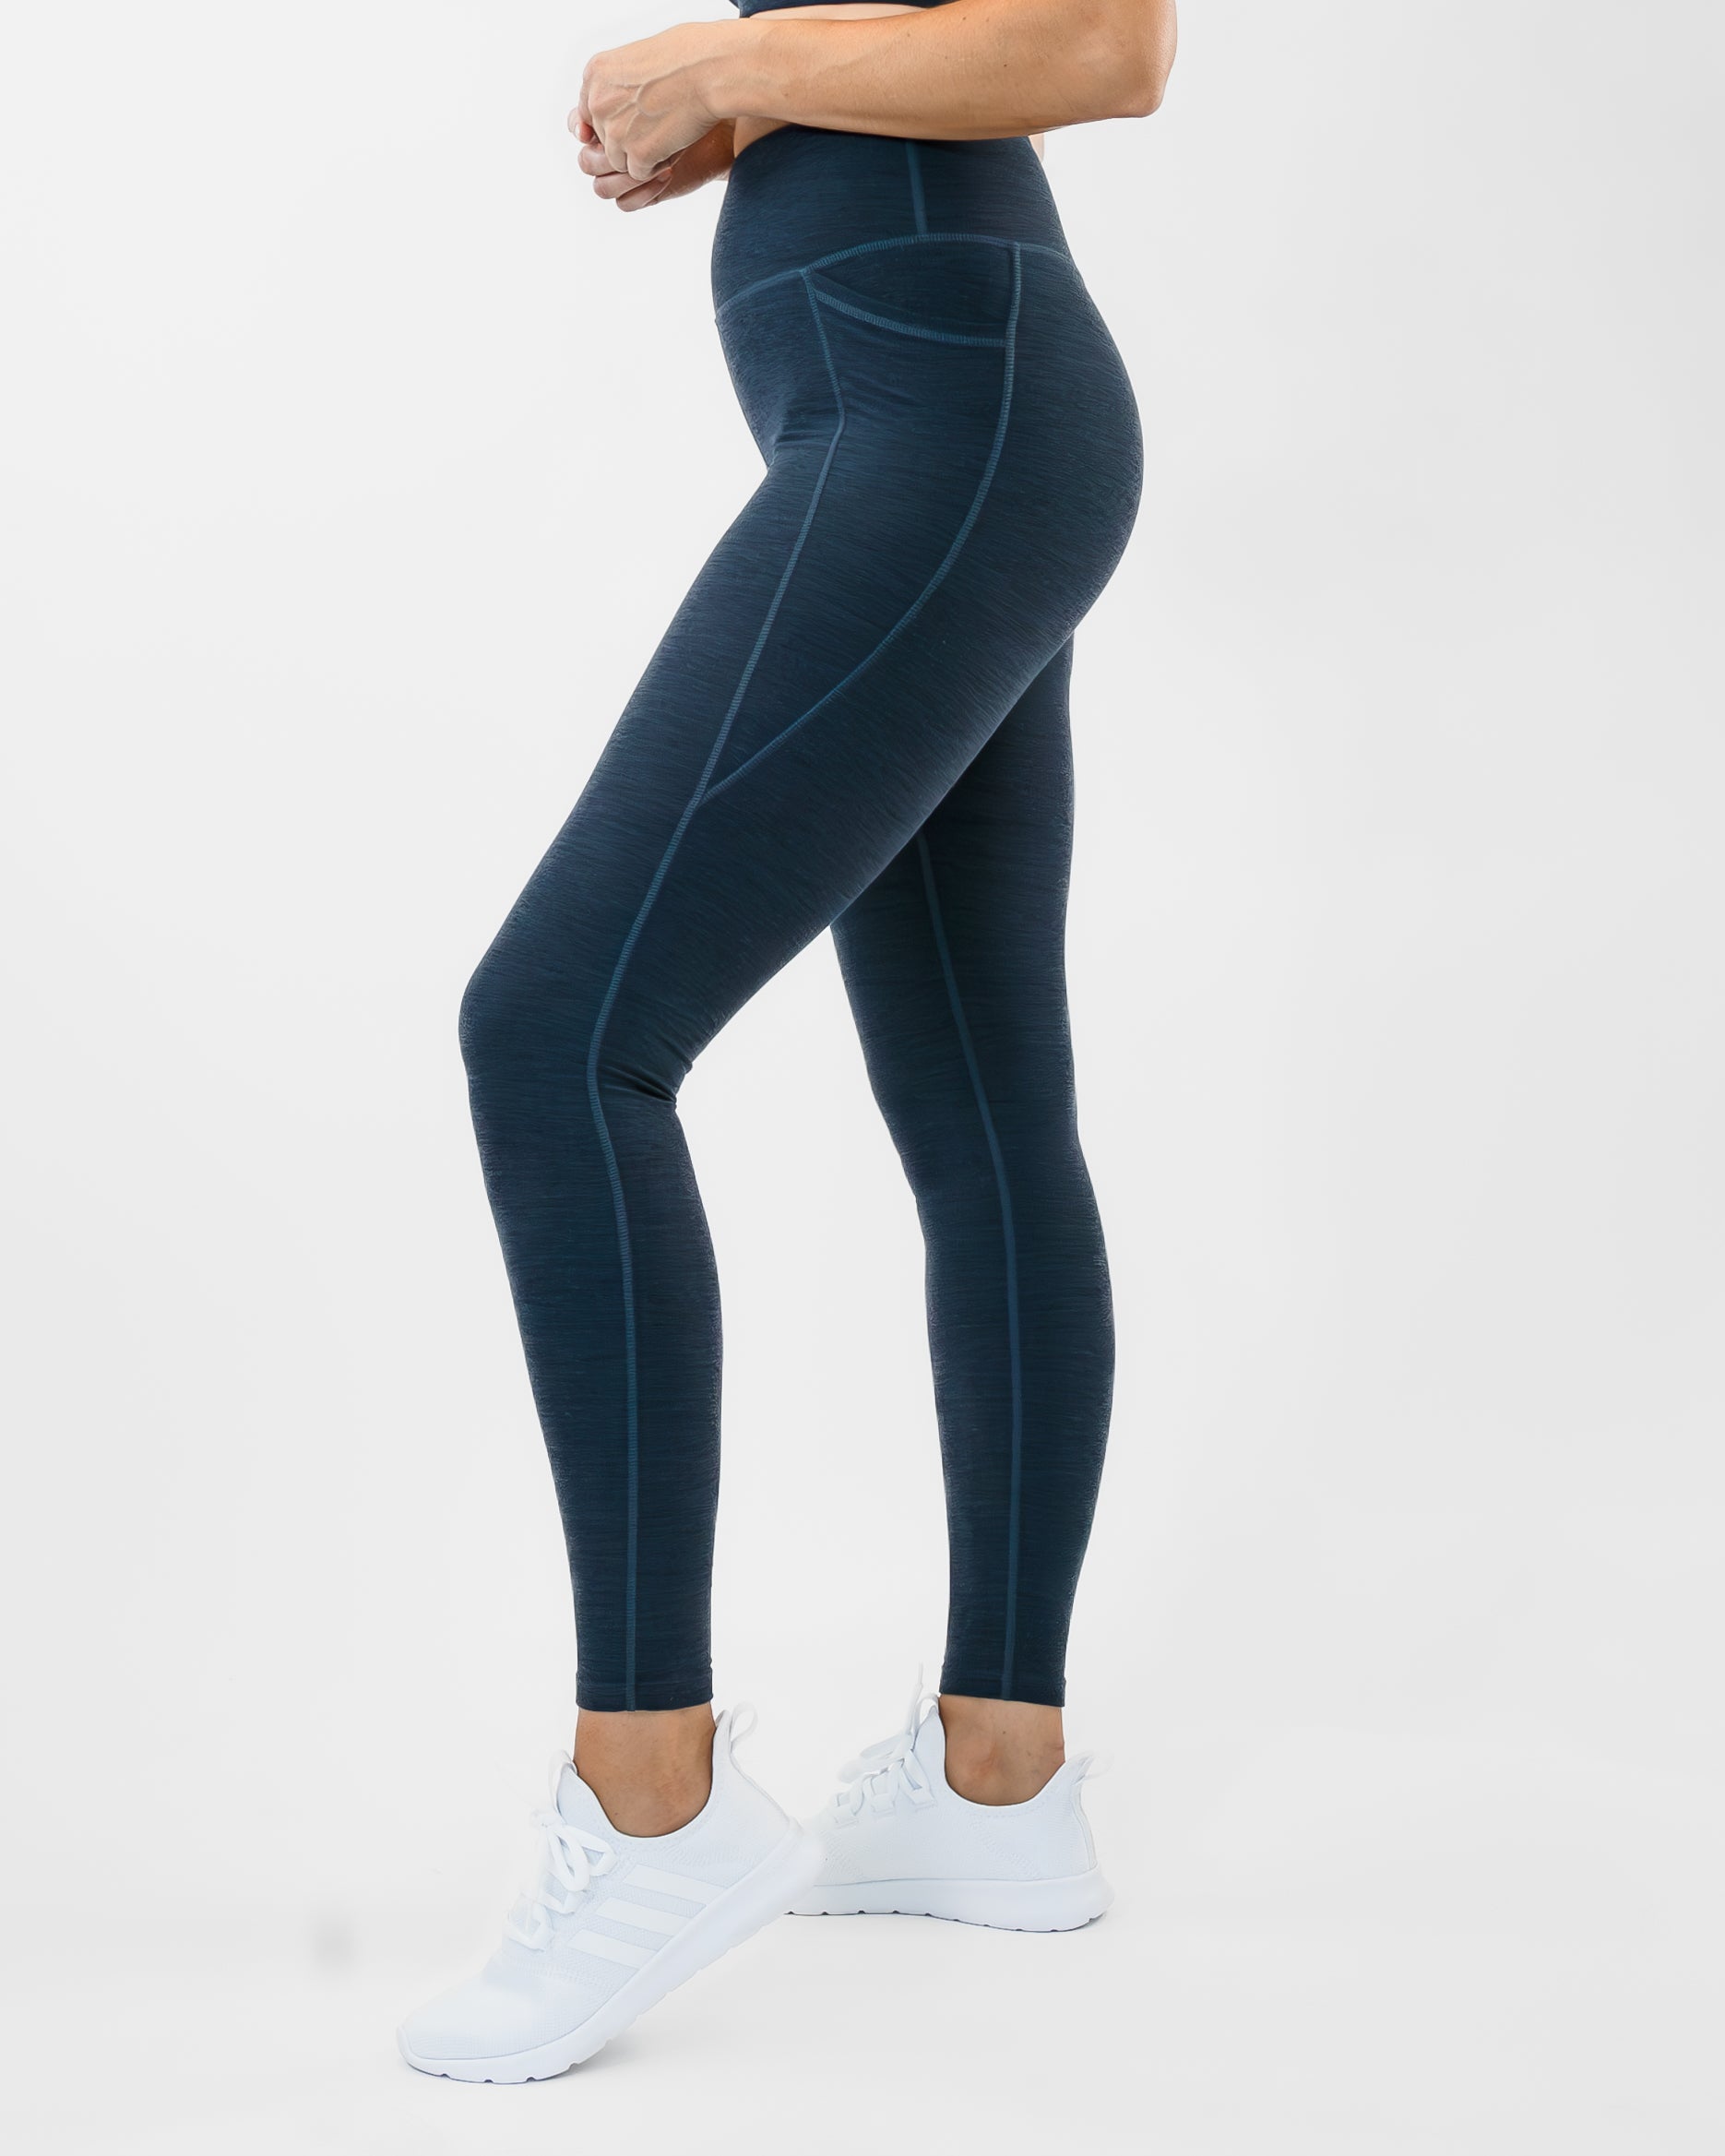 Alphalete Compression Tight Workout Spandex High-Rise Leggings • Turquoise  • XS